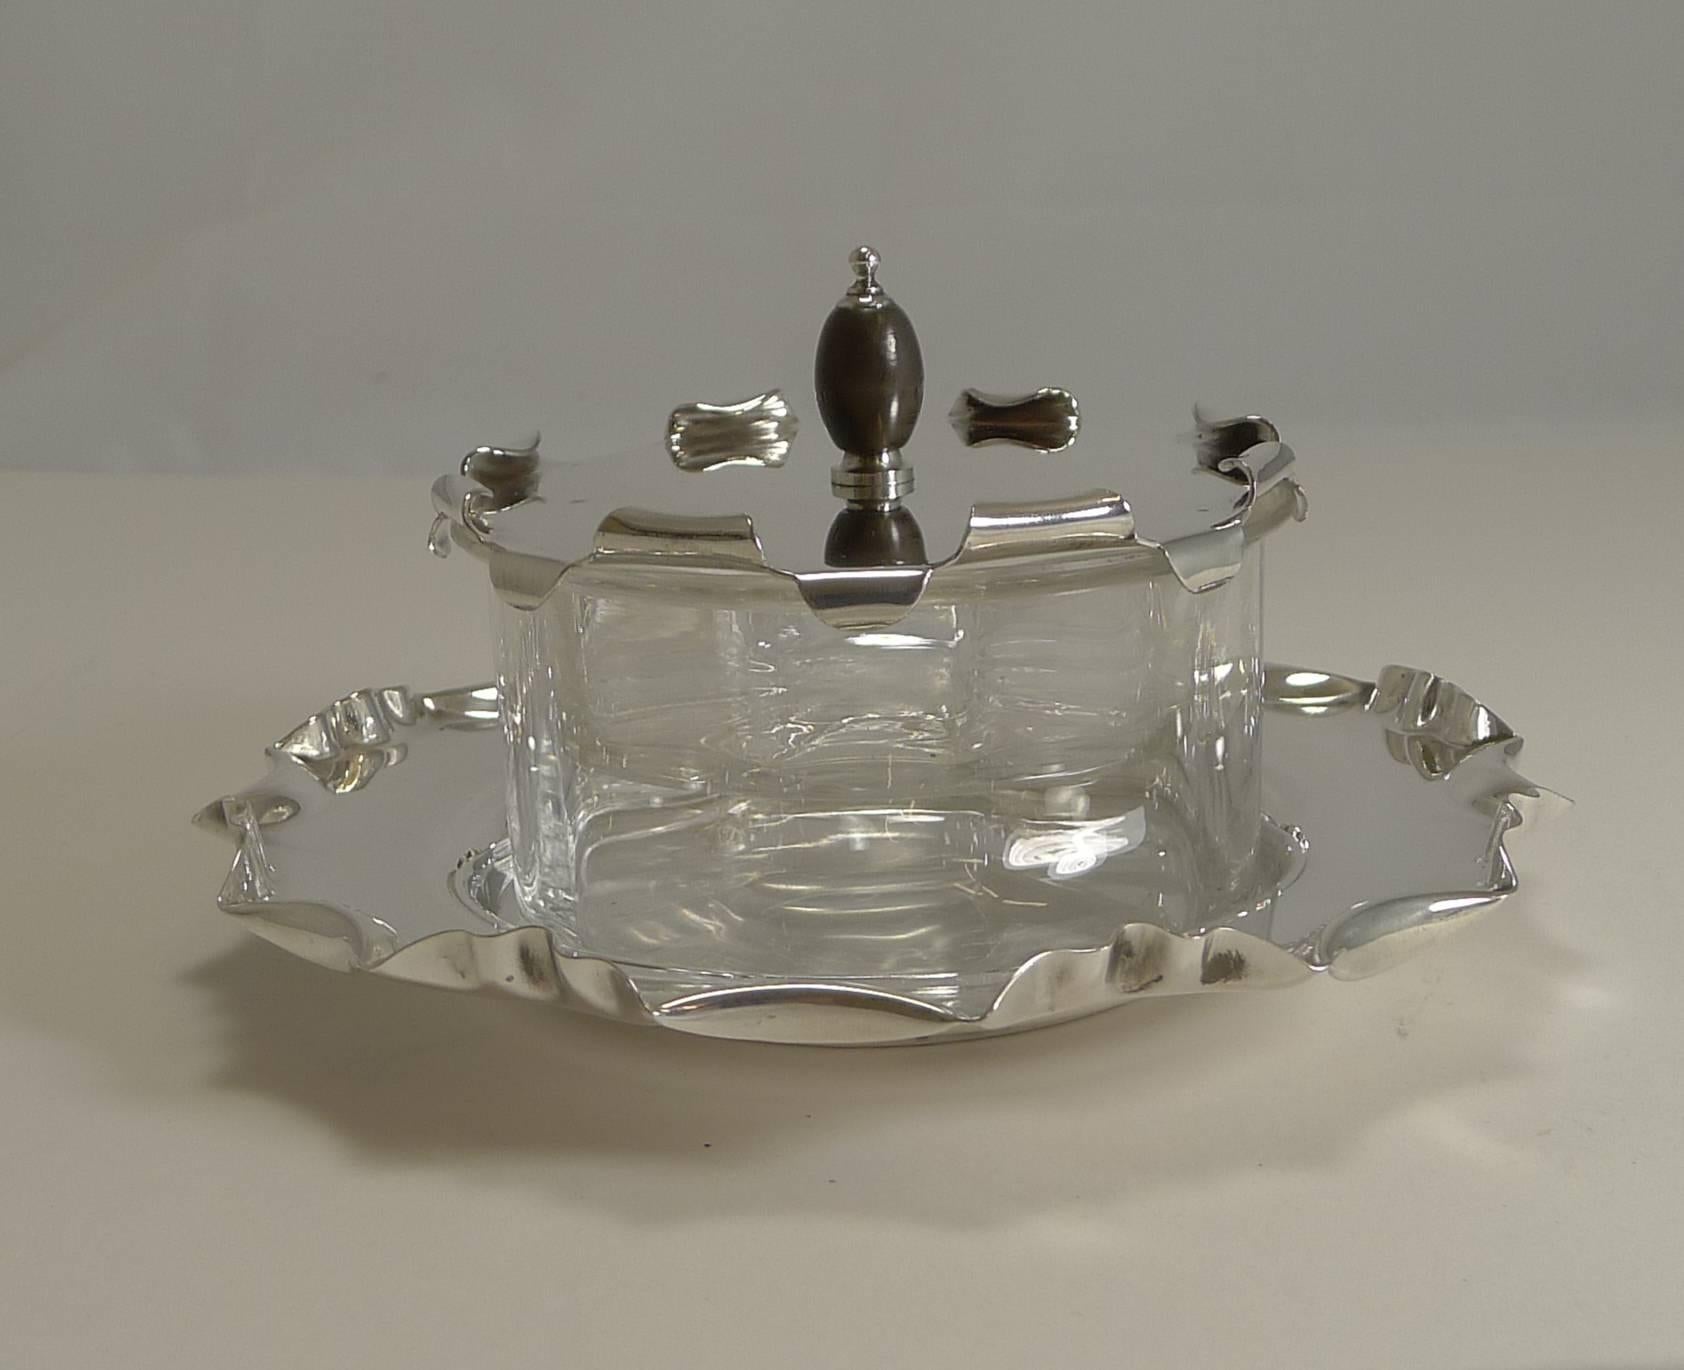 Early 20th Century Antique English Silver Plate and Glass Caviar Dish / Server, circa 1900